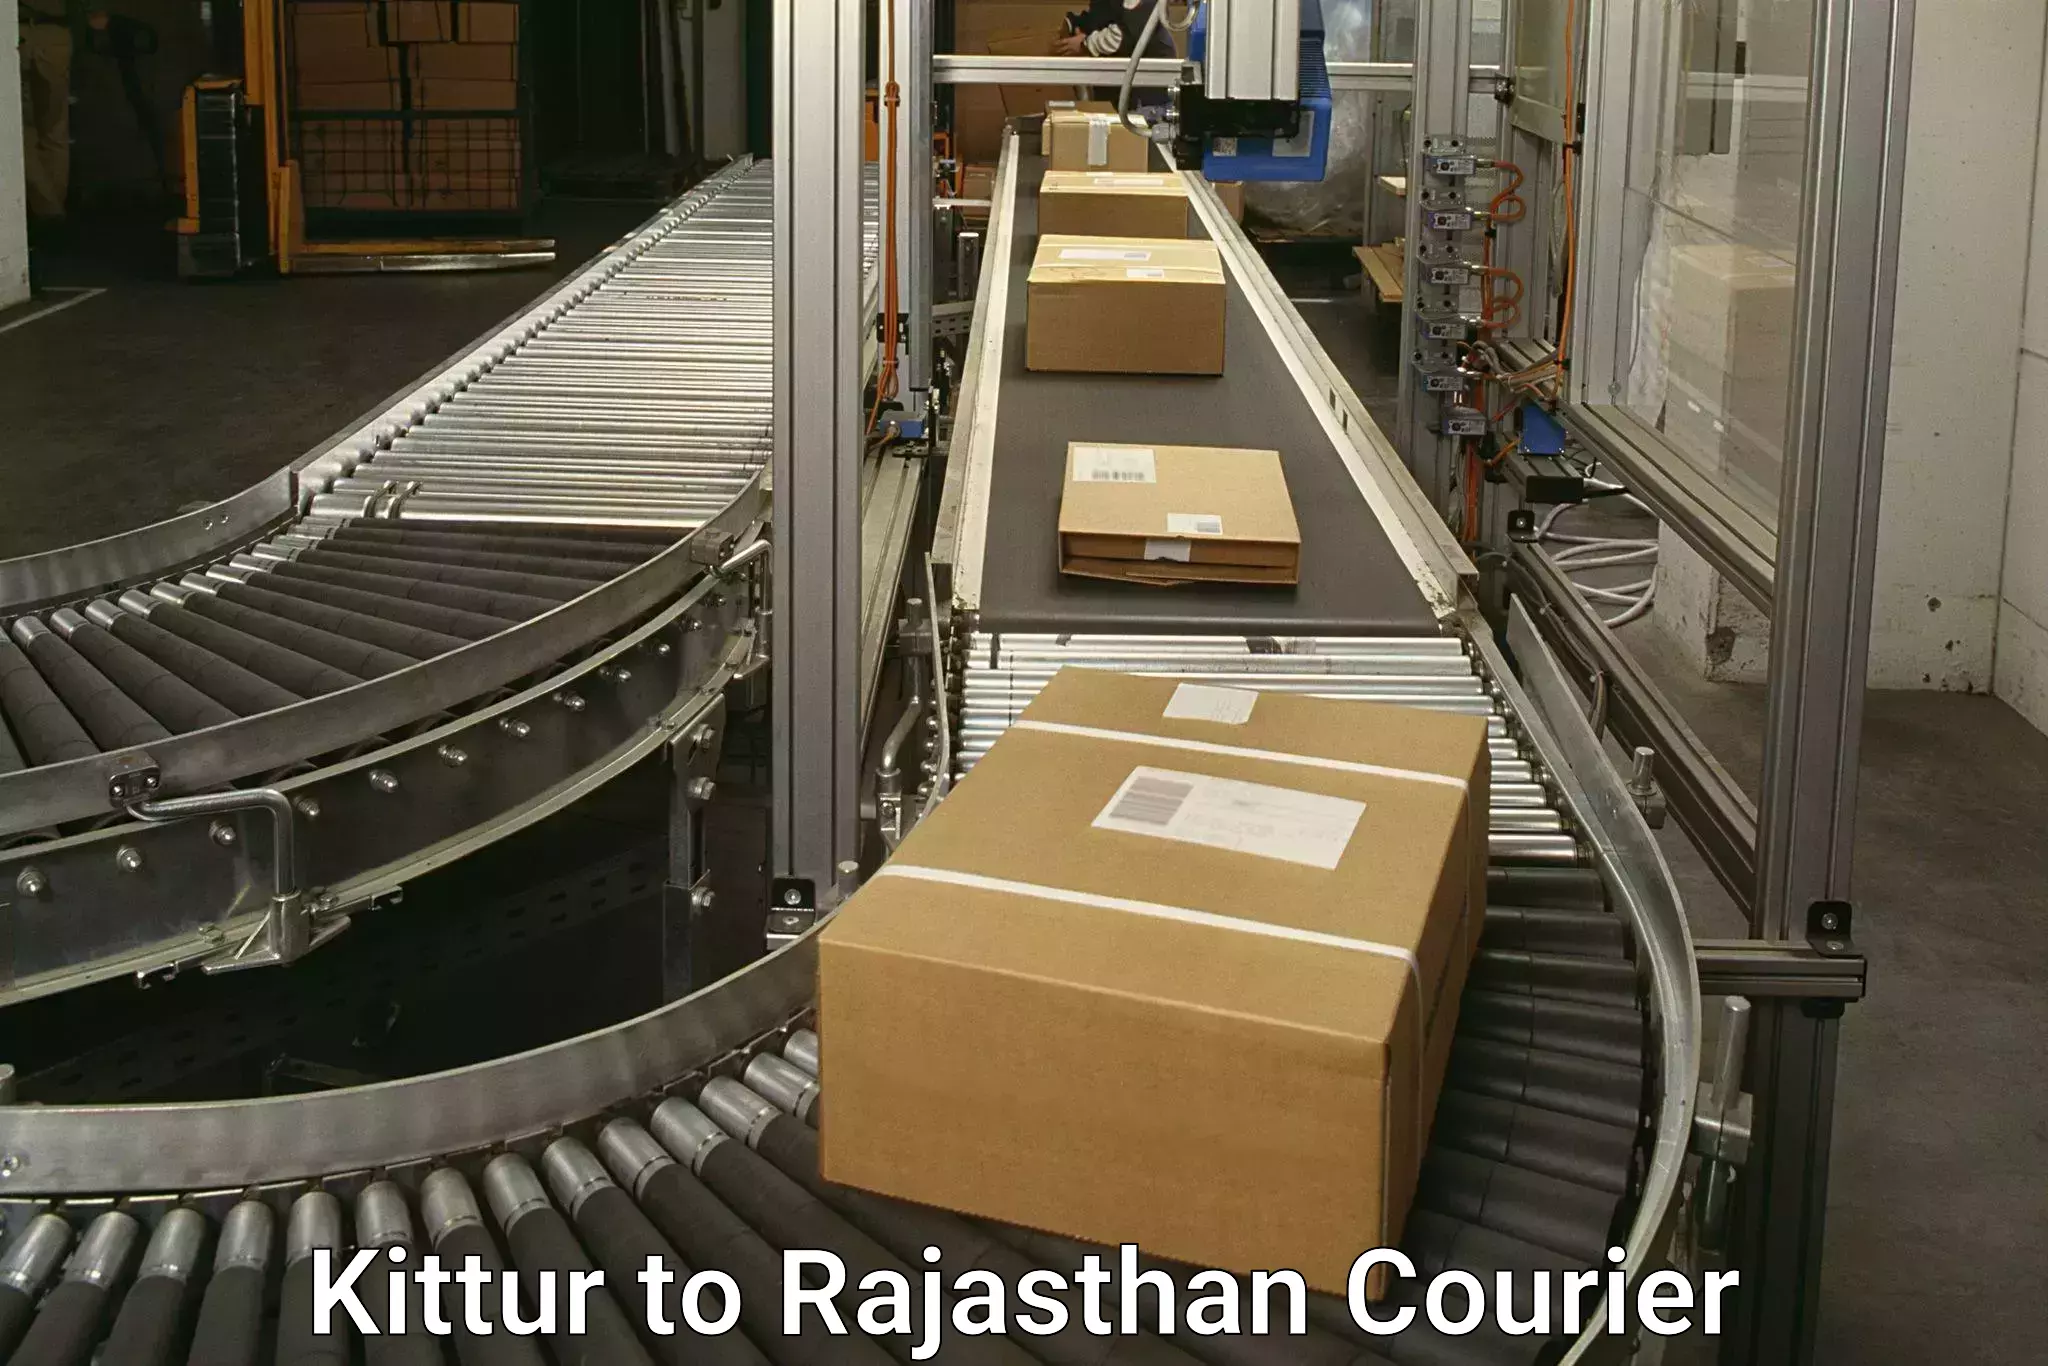 Express delivery capabilities Kittur to Kishangarh